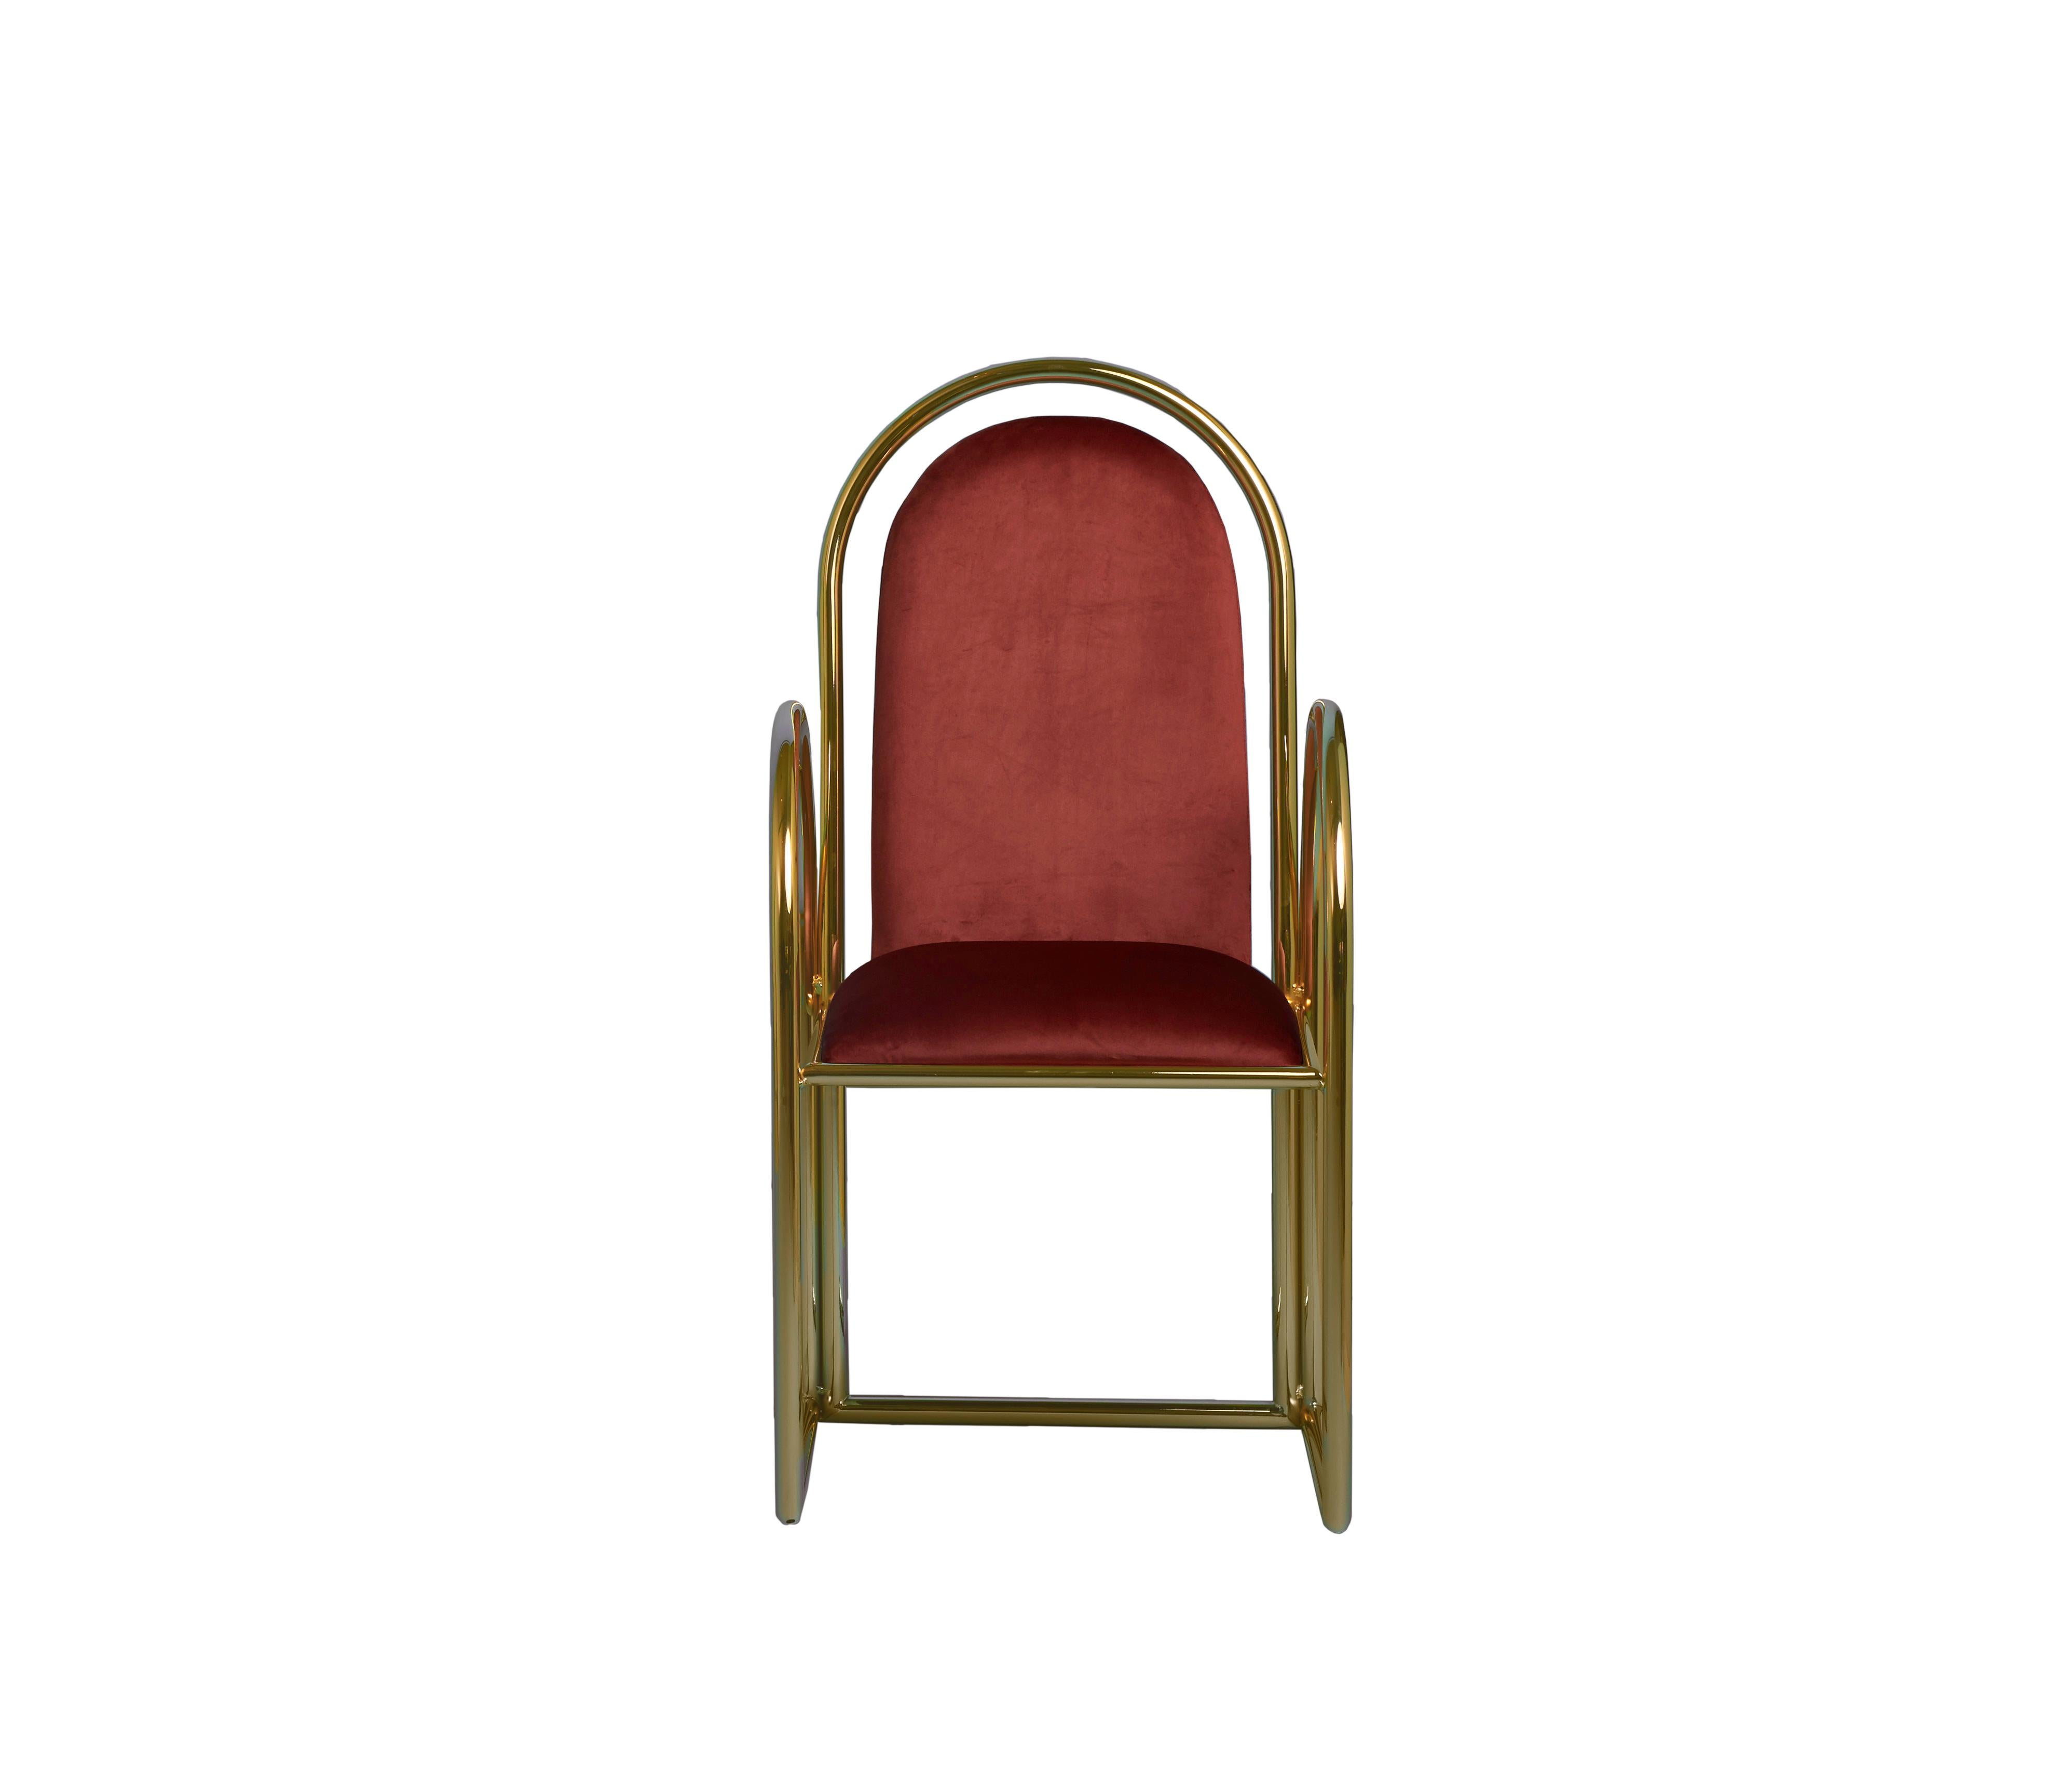 Modern Arco Chair by Houtique